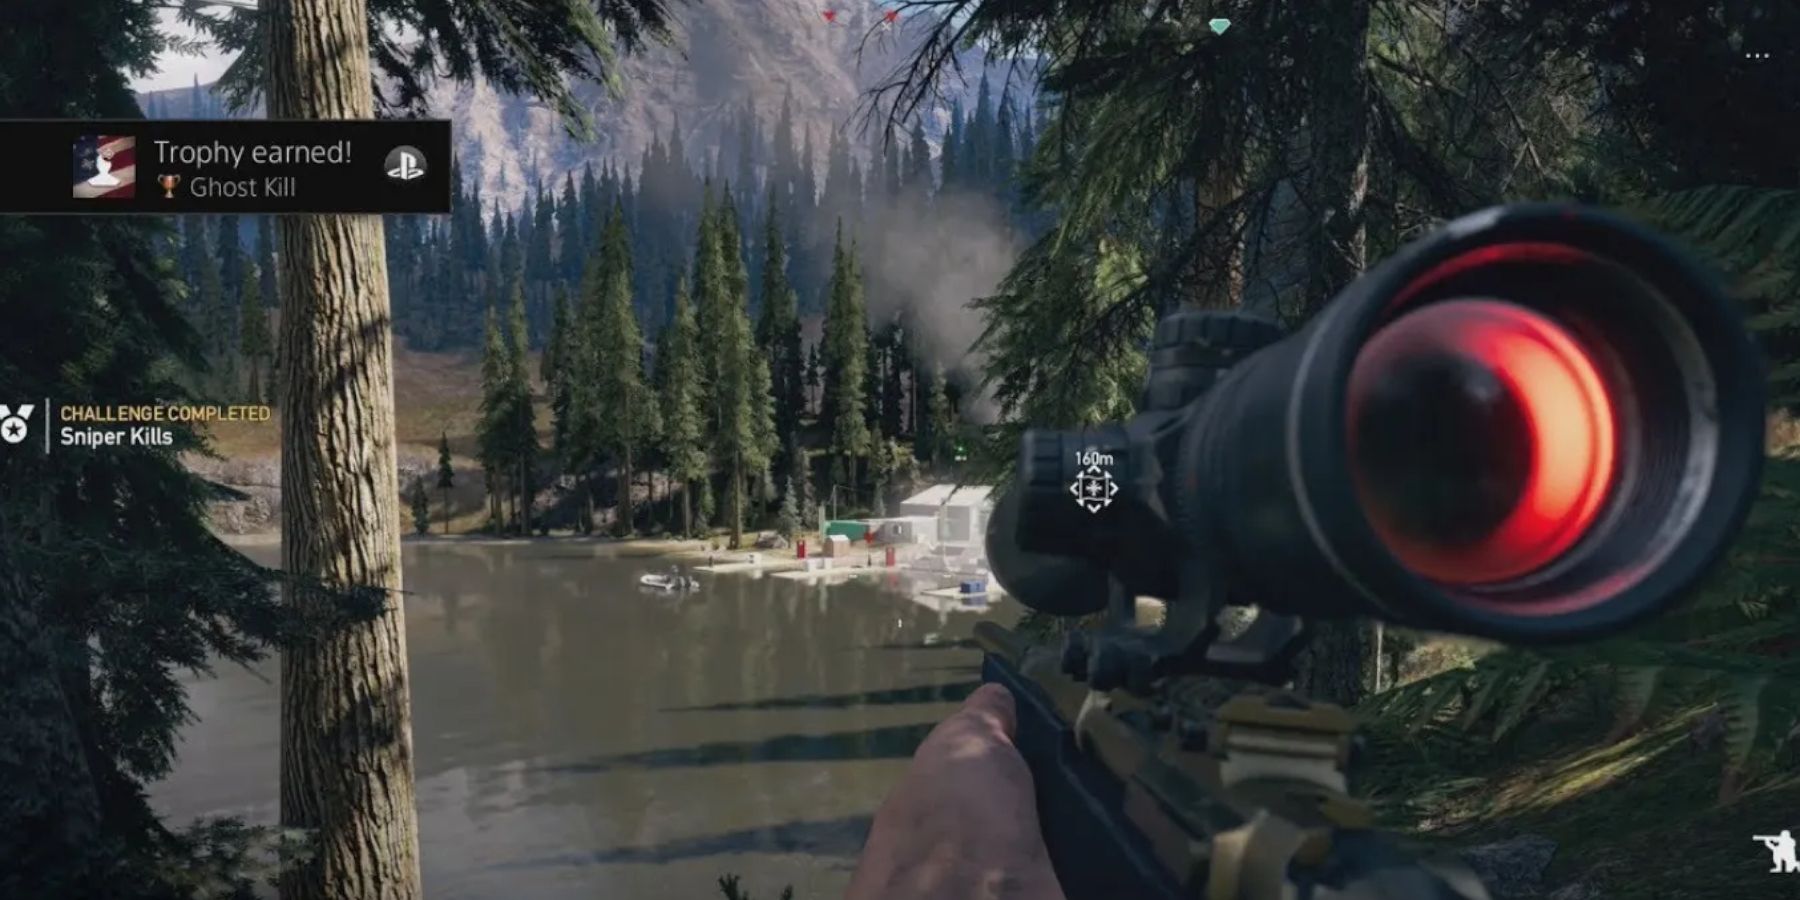 Far Cry 5 - Getting the ghost kill trophy using a sniper rifle